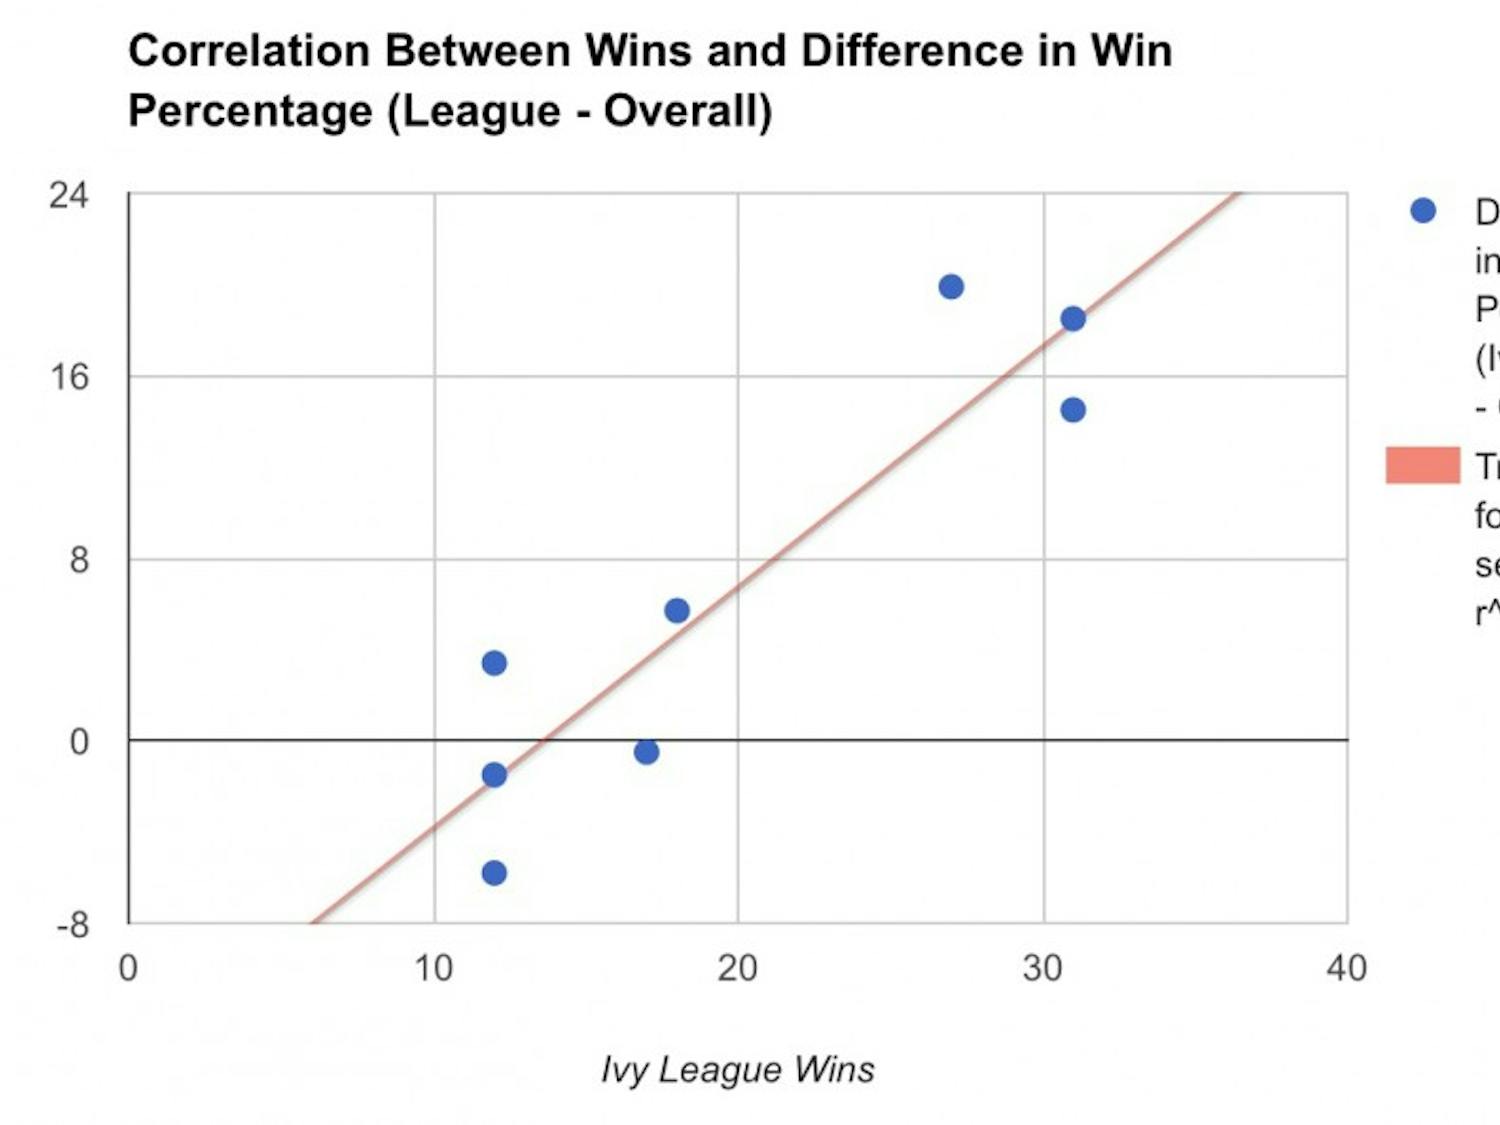 There is a strong positive linear relationship between baseball Ivy League wins and difference between Ivy and overall win percentage.